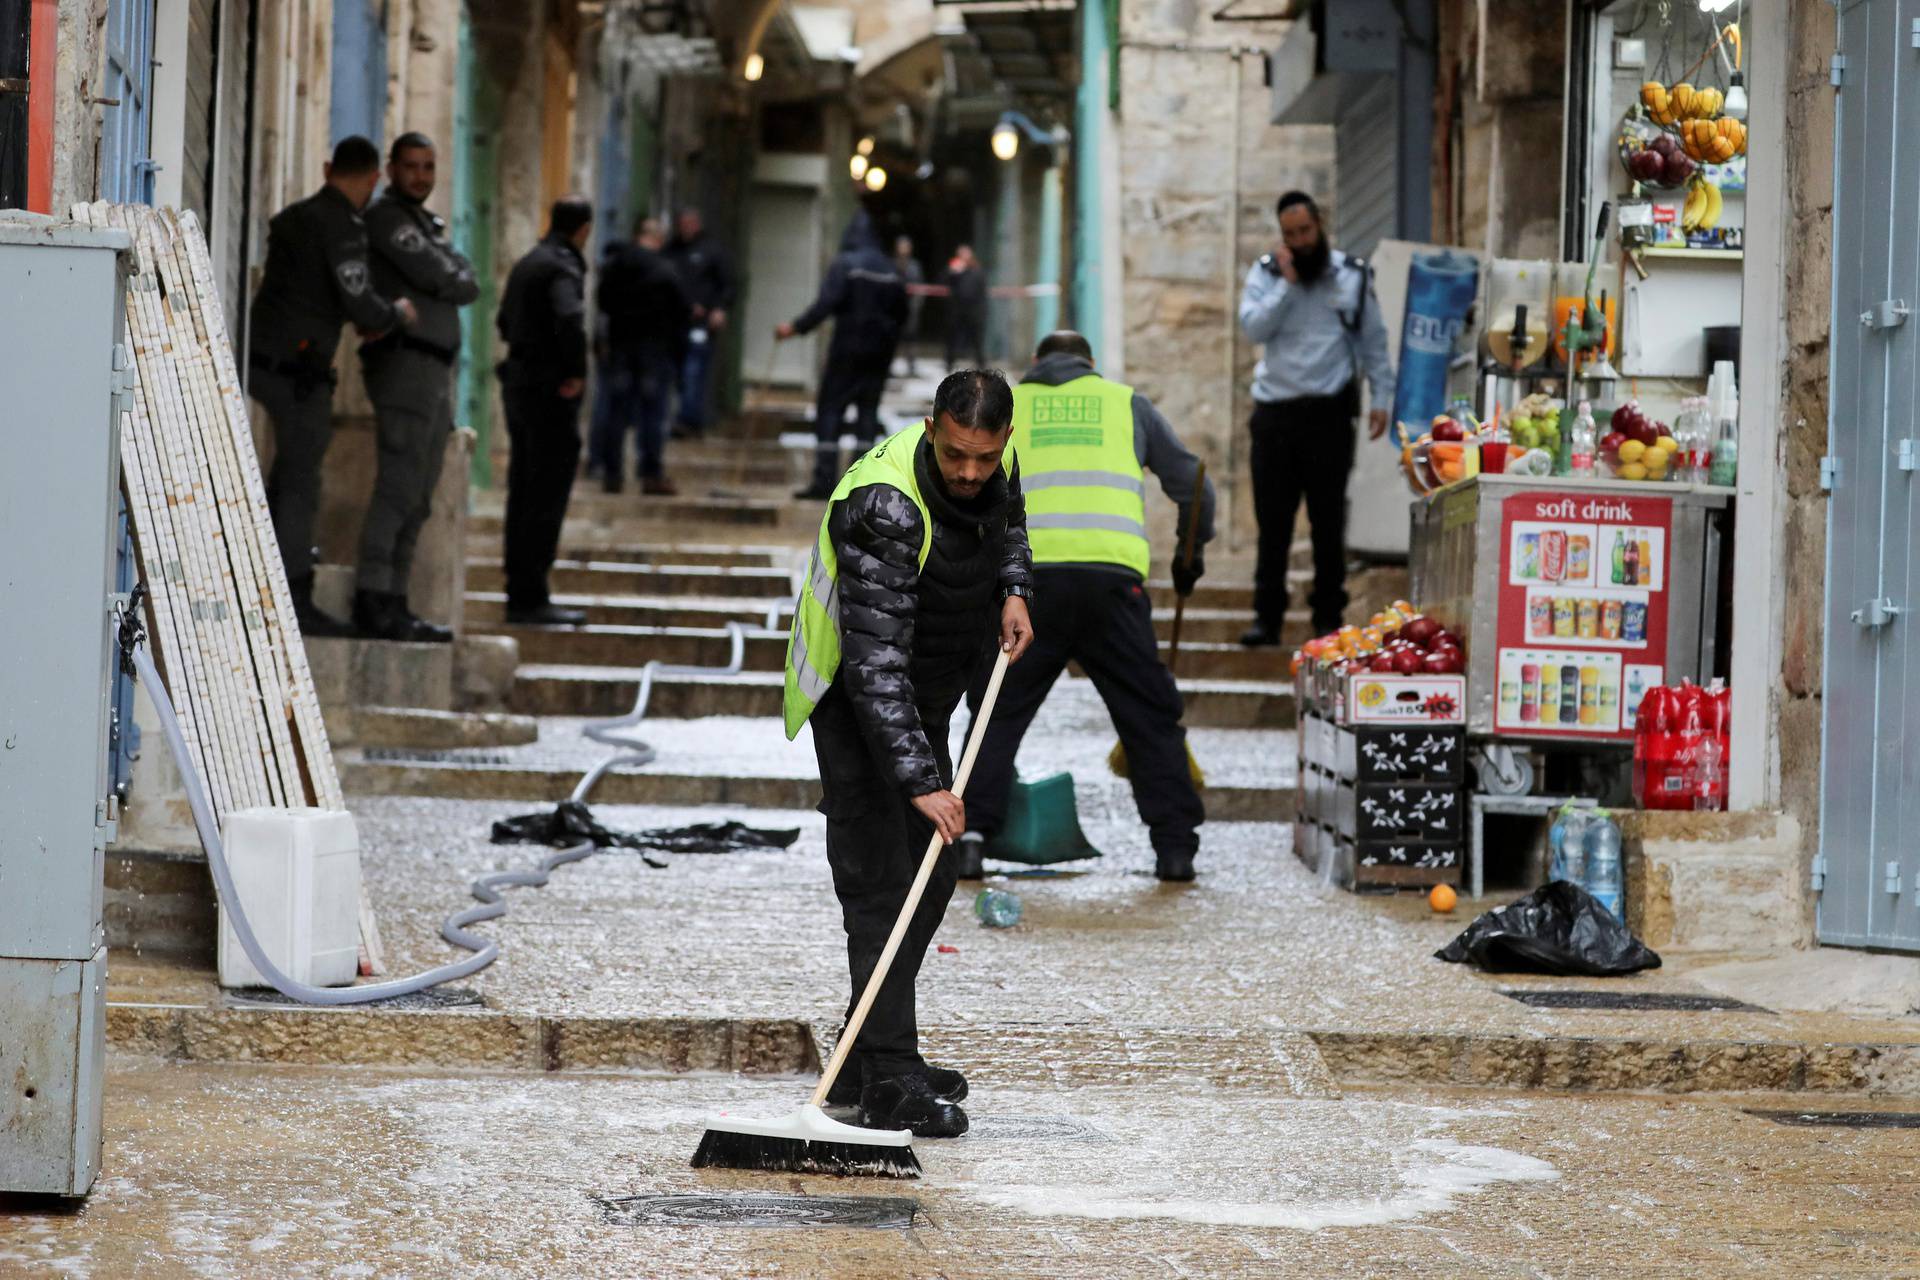 Workers clean the stairs at the site of a shooting incident in Jerusalem's Old City